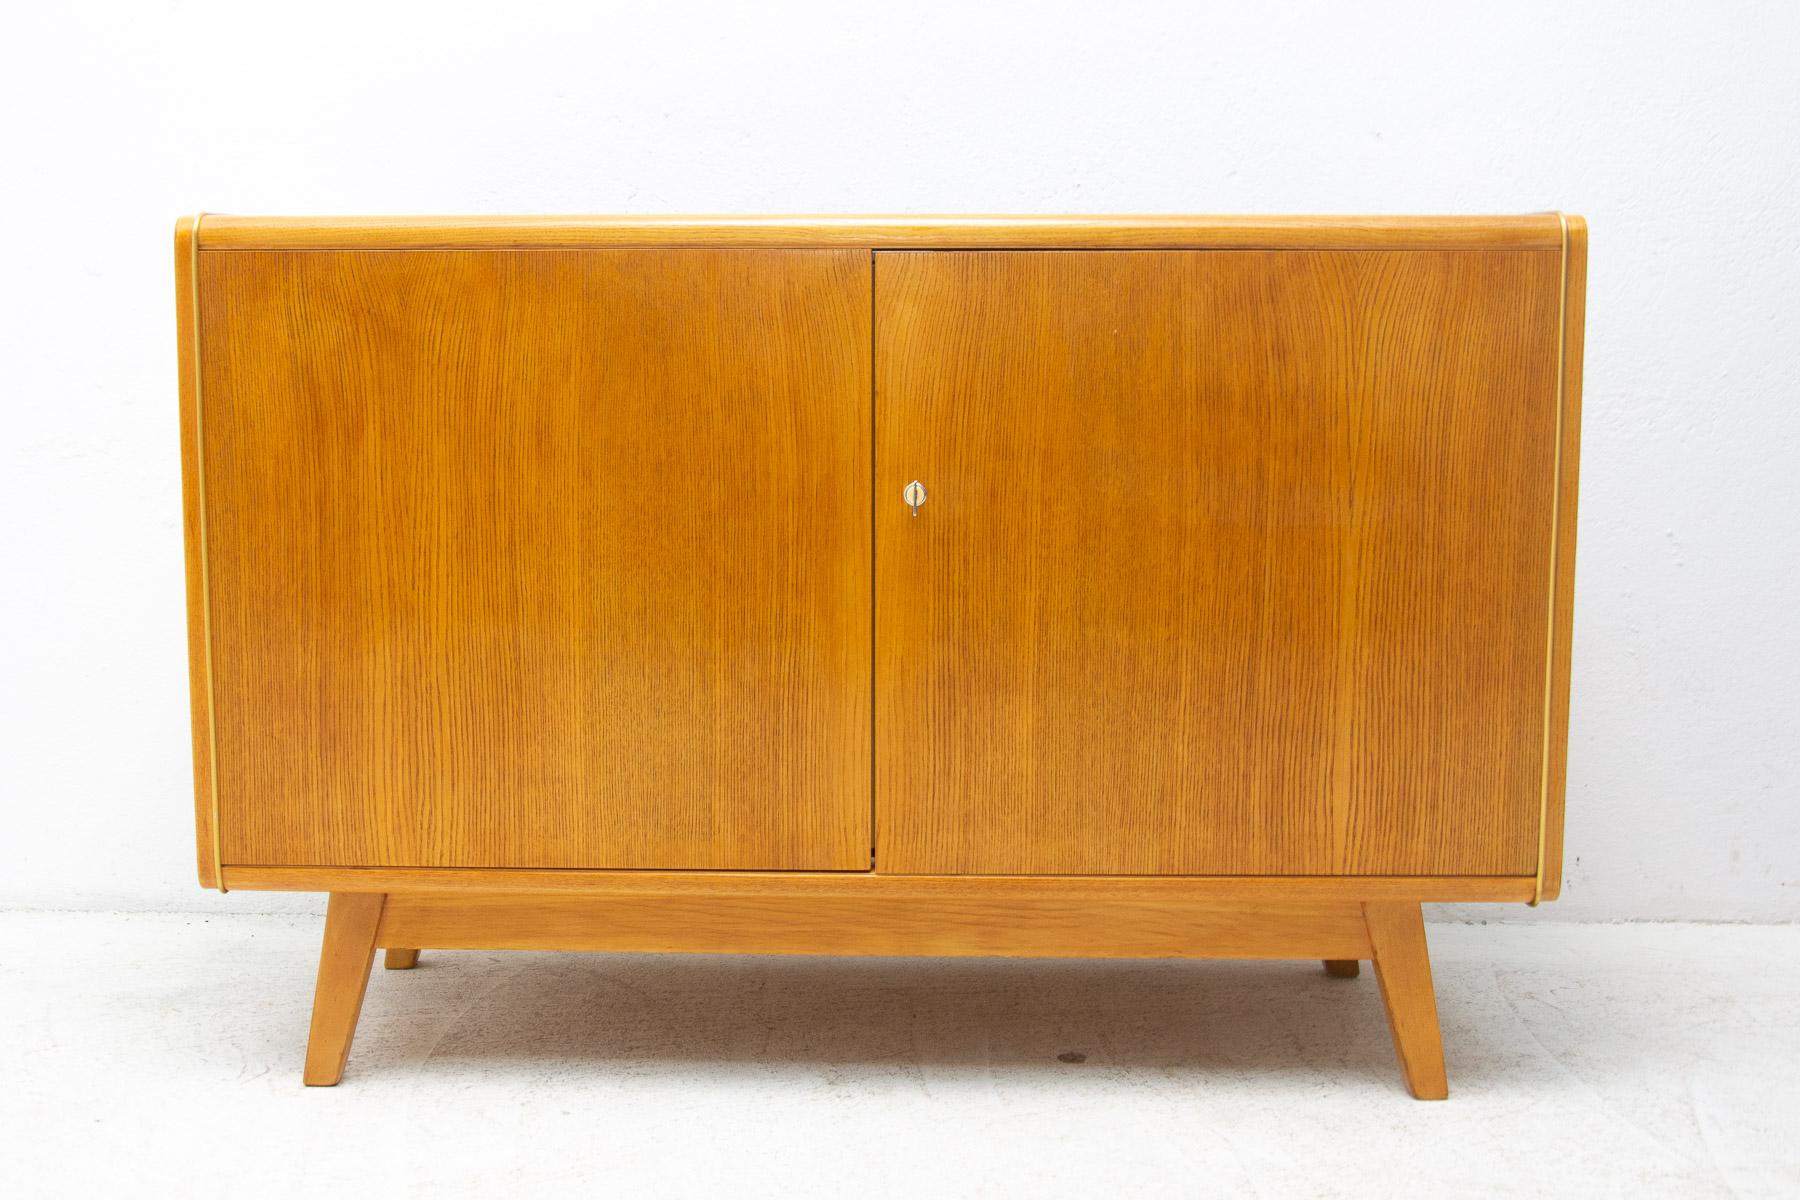 This mid-century sideboard was designed by Hubert Nepožitek & Bohumil Landsman for Jitona company in the 1960´s. Material: beech wood, opaxite glass. In good vintage condition, showing slight signs of age and using.